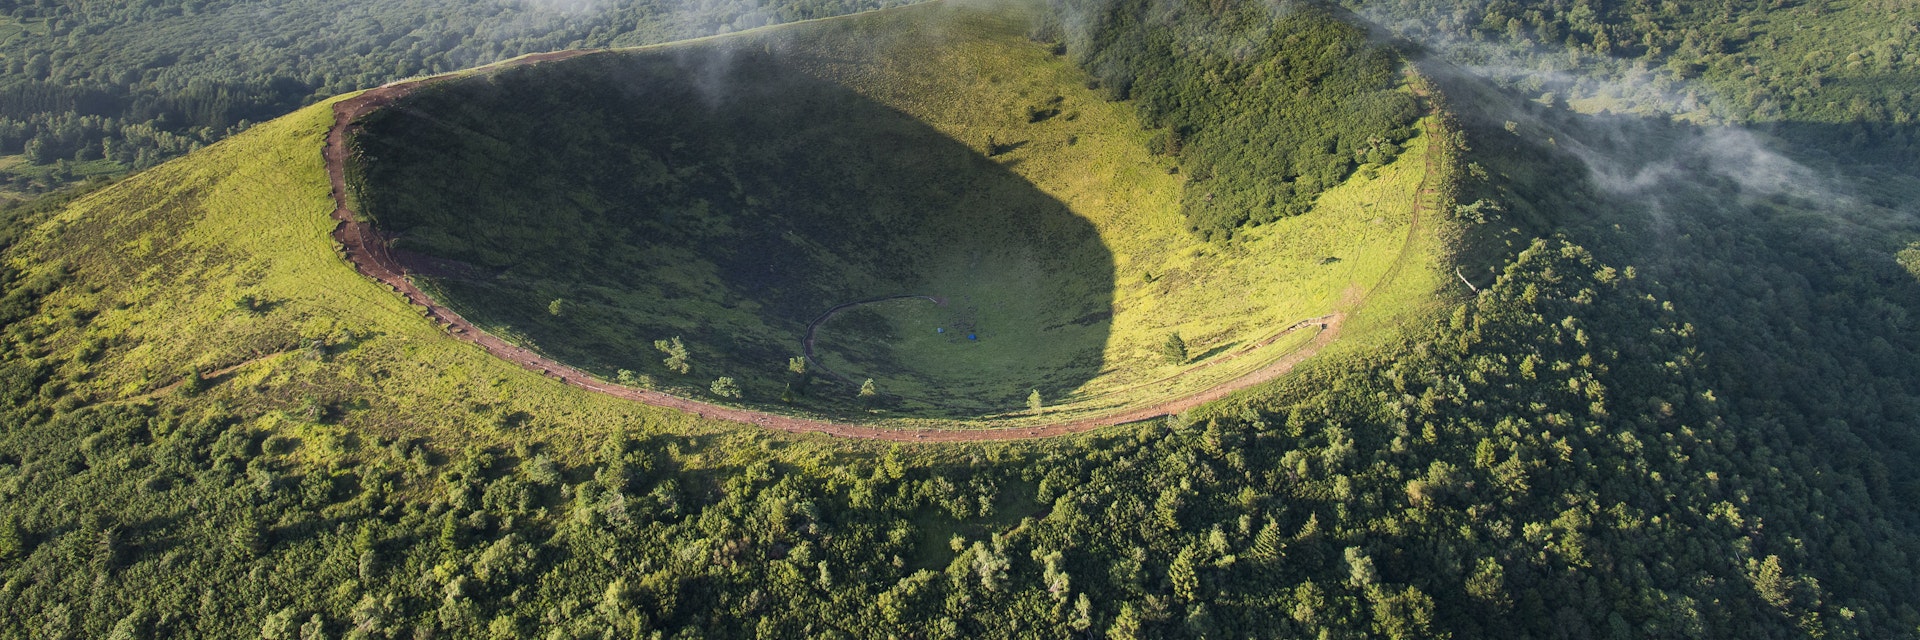 France, Puy de Dome, the Regional Natural Park of the Volcanoes of Auvergne, Chaine des Puys, Orcines, the crater of Puy Pariou volcano (aerial view)